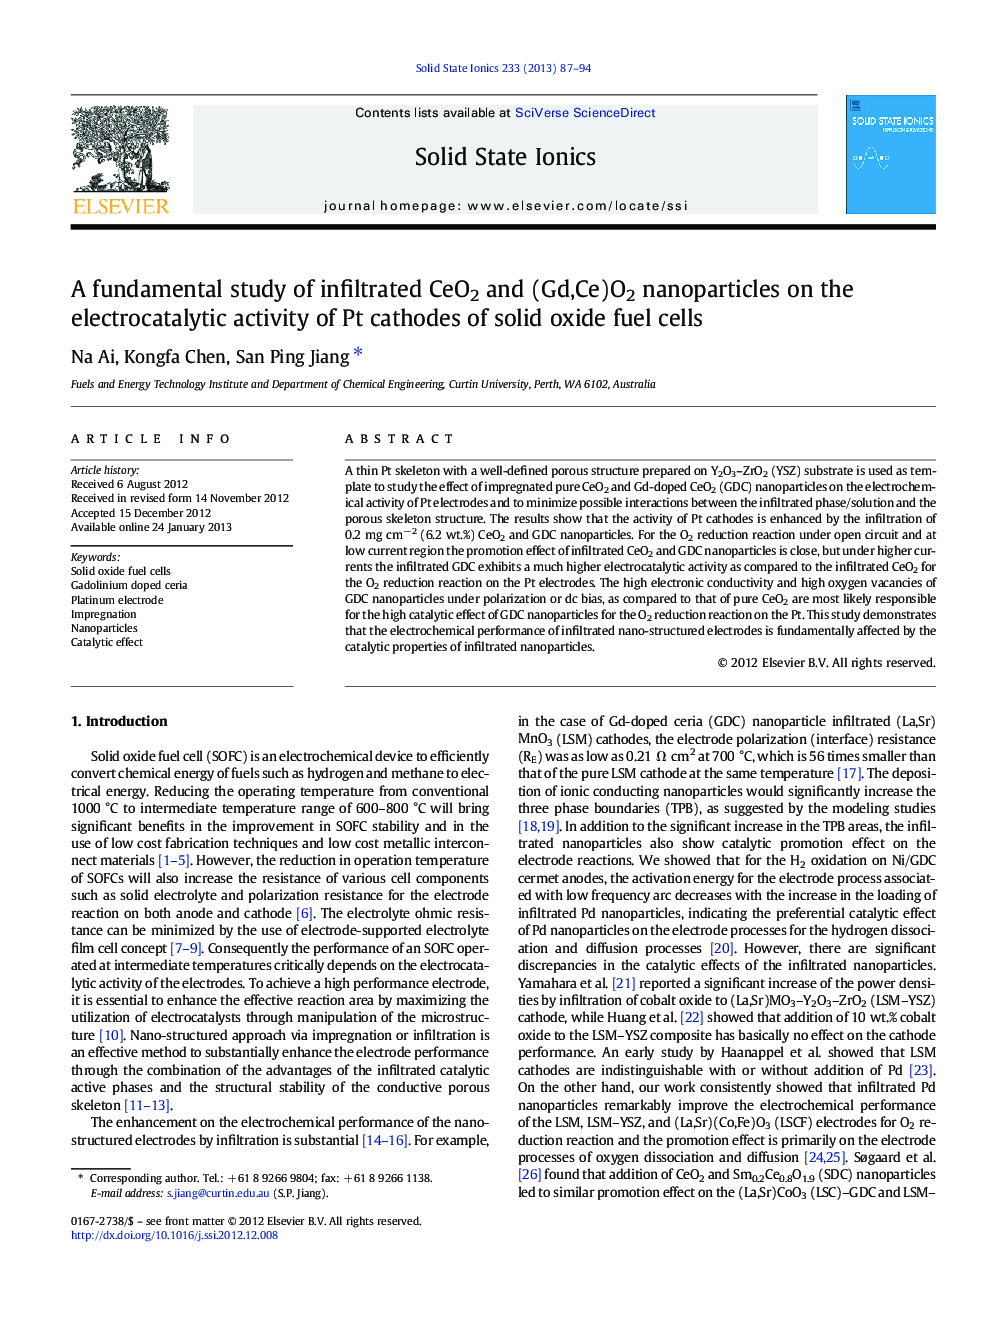 A fundamental study of infiltrated CeO2 and (Gd,Ce)O2 nanoparticles on the electrocatalytic activity of Pt cathodes of solid oxide fuel cells